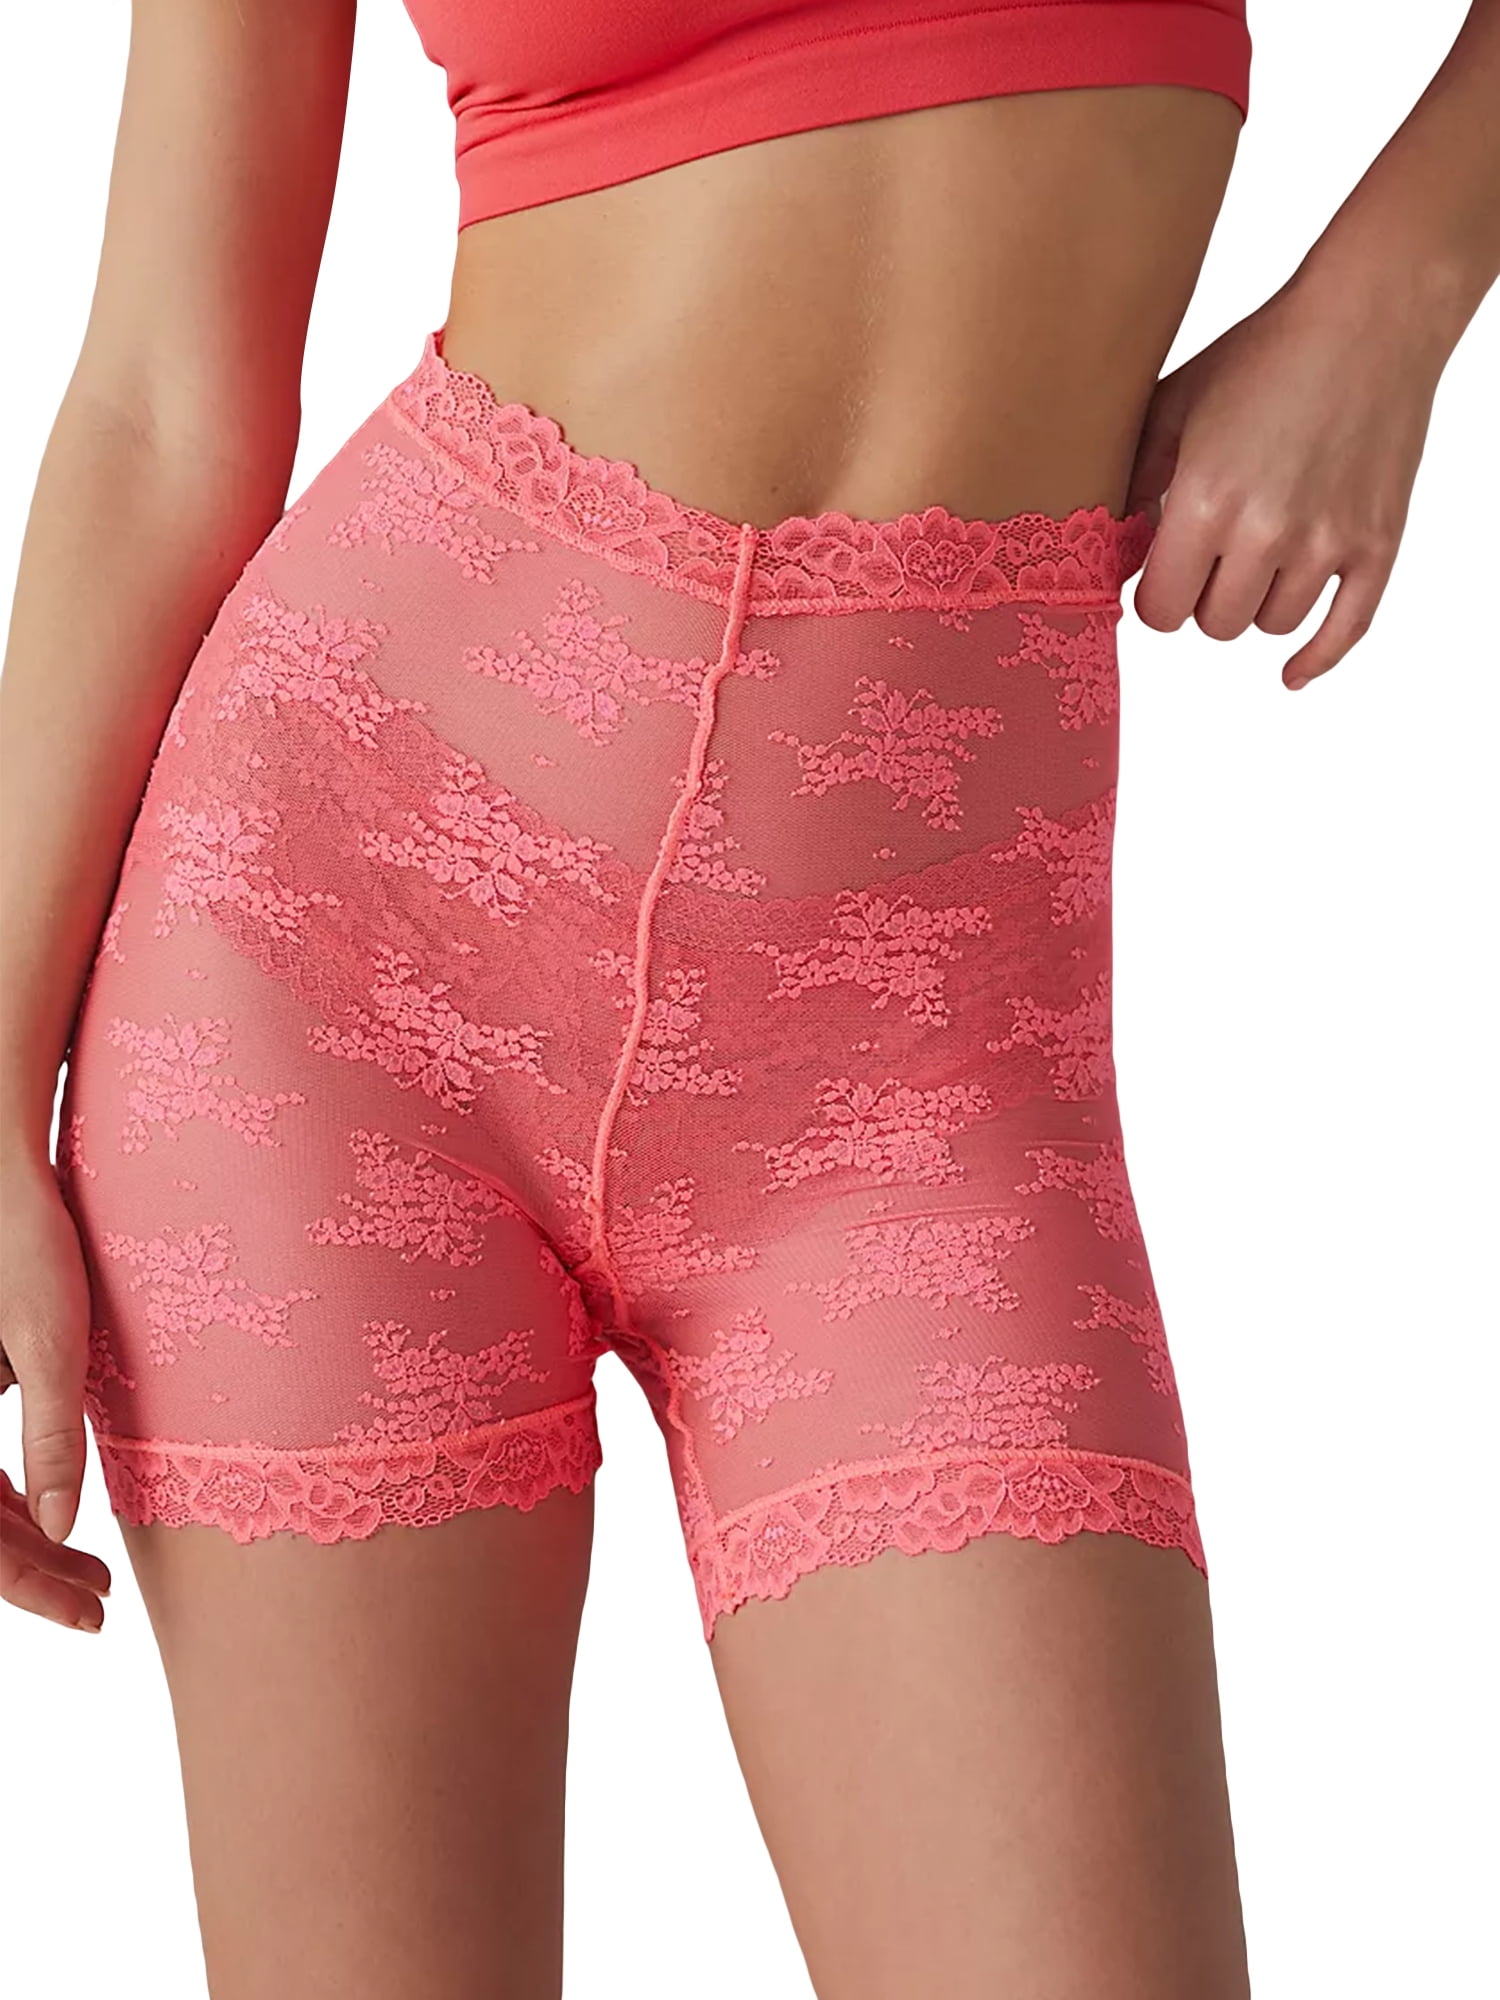 MANIFIQUE 3 Pack Women Slip Shorts for Under Dresses Anti Chafing Underwear  Lace Boyshorts Panties for Summer